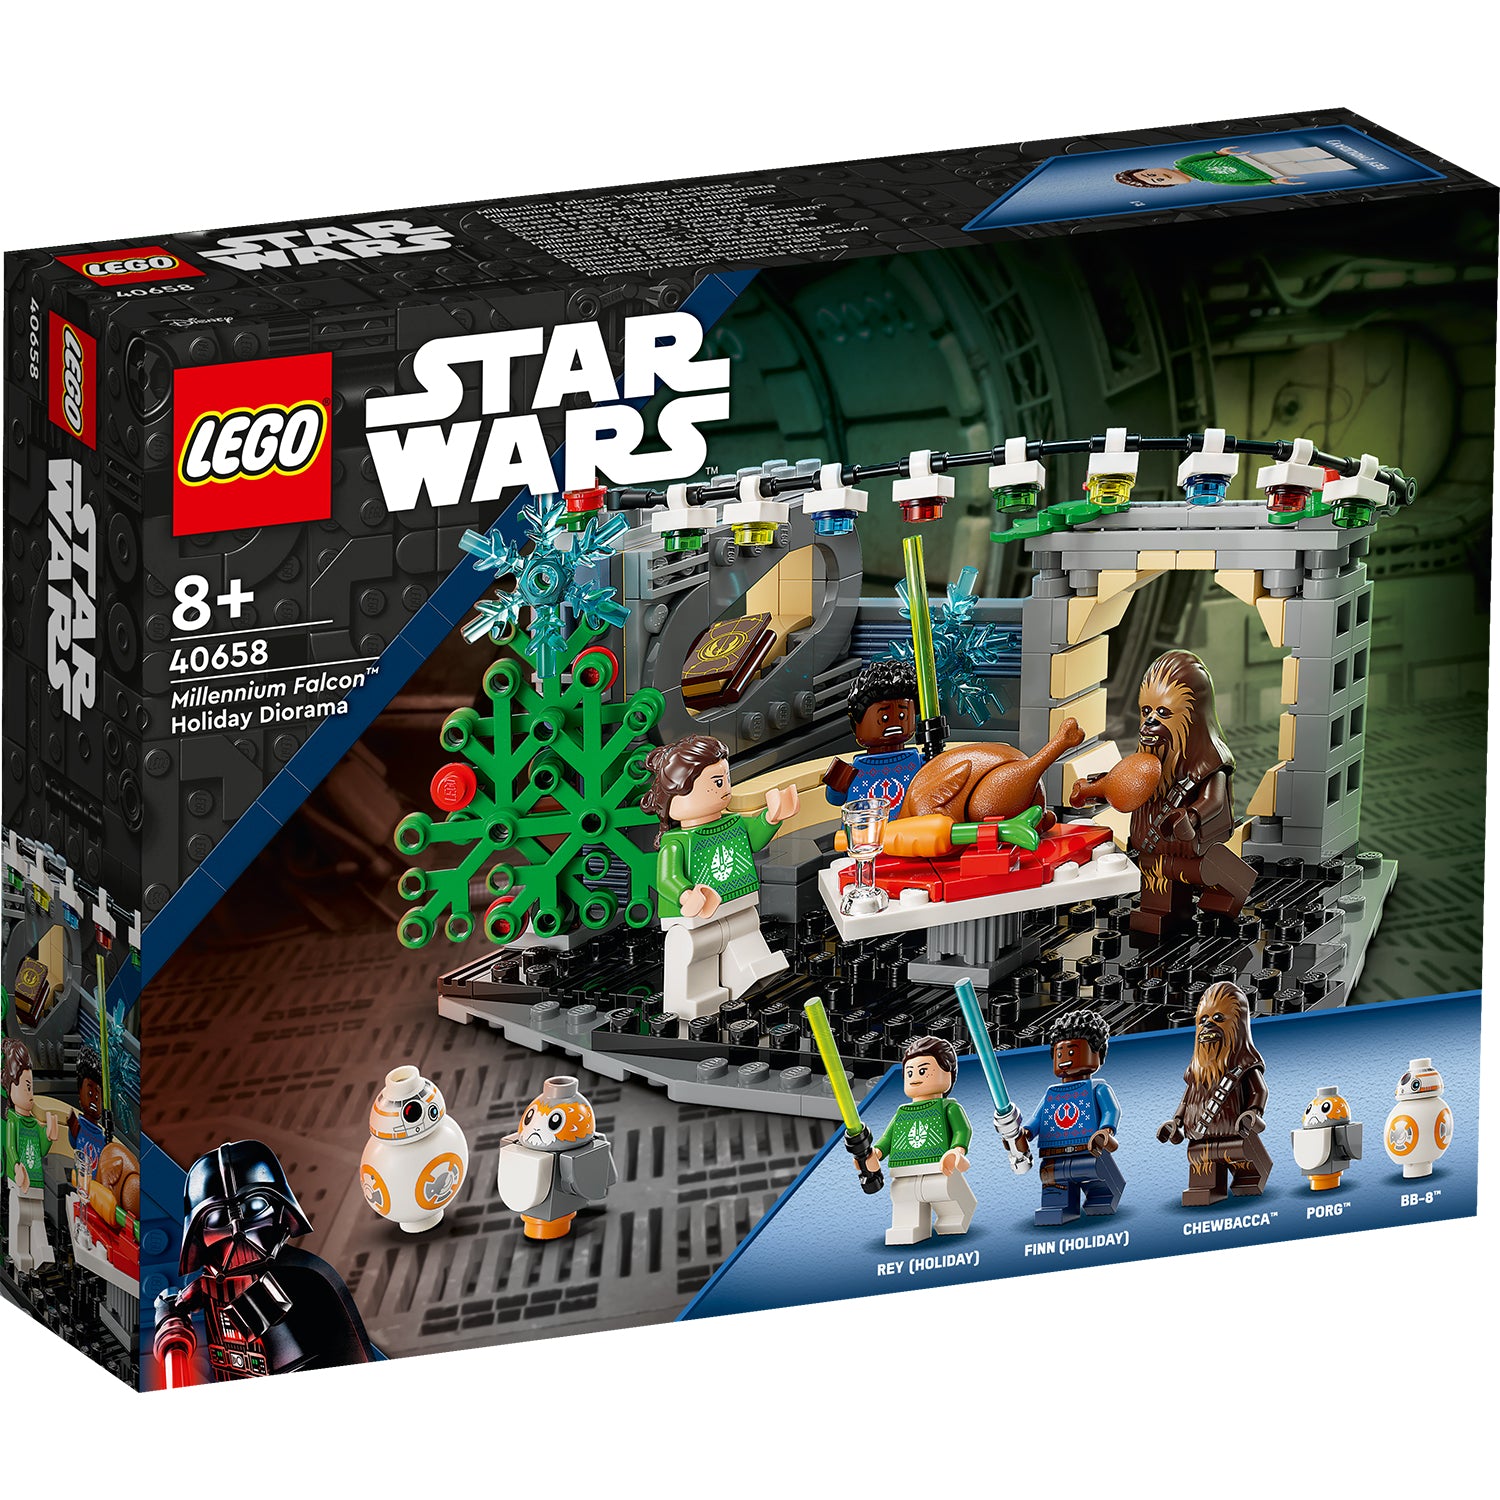 Three New LEGO Sets Inspired by Disney's “Wish” Available This October 